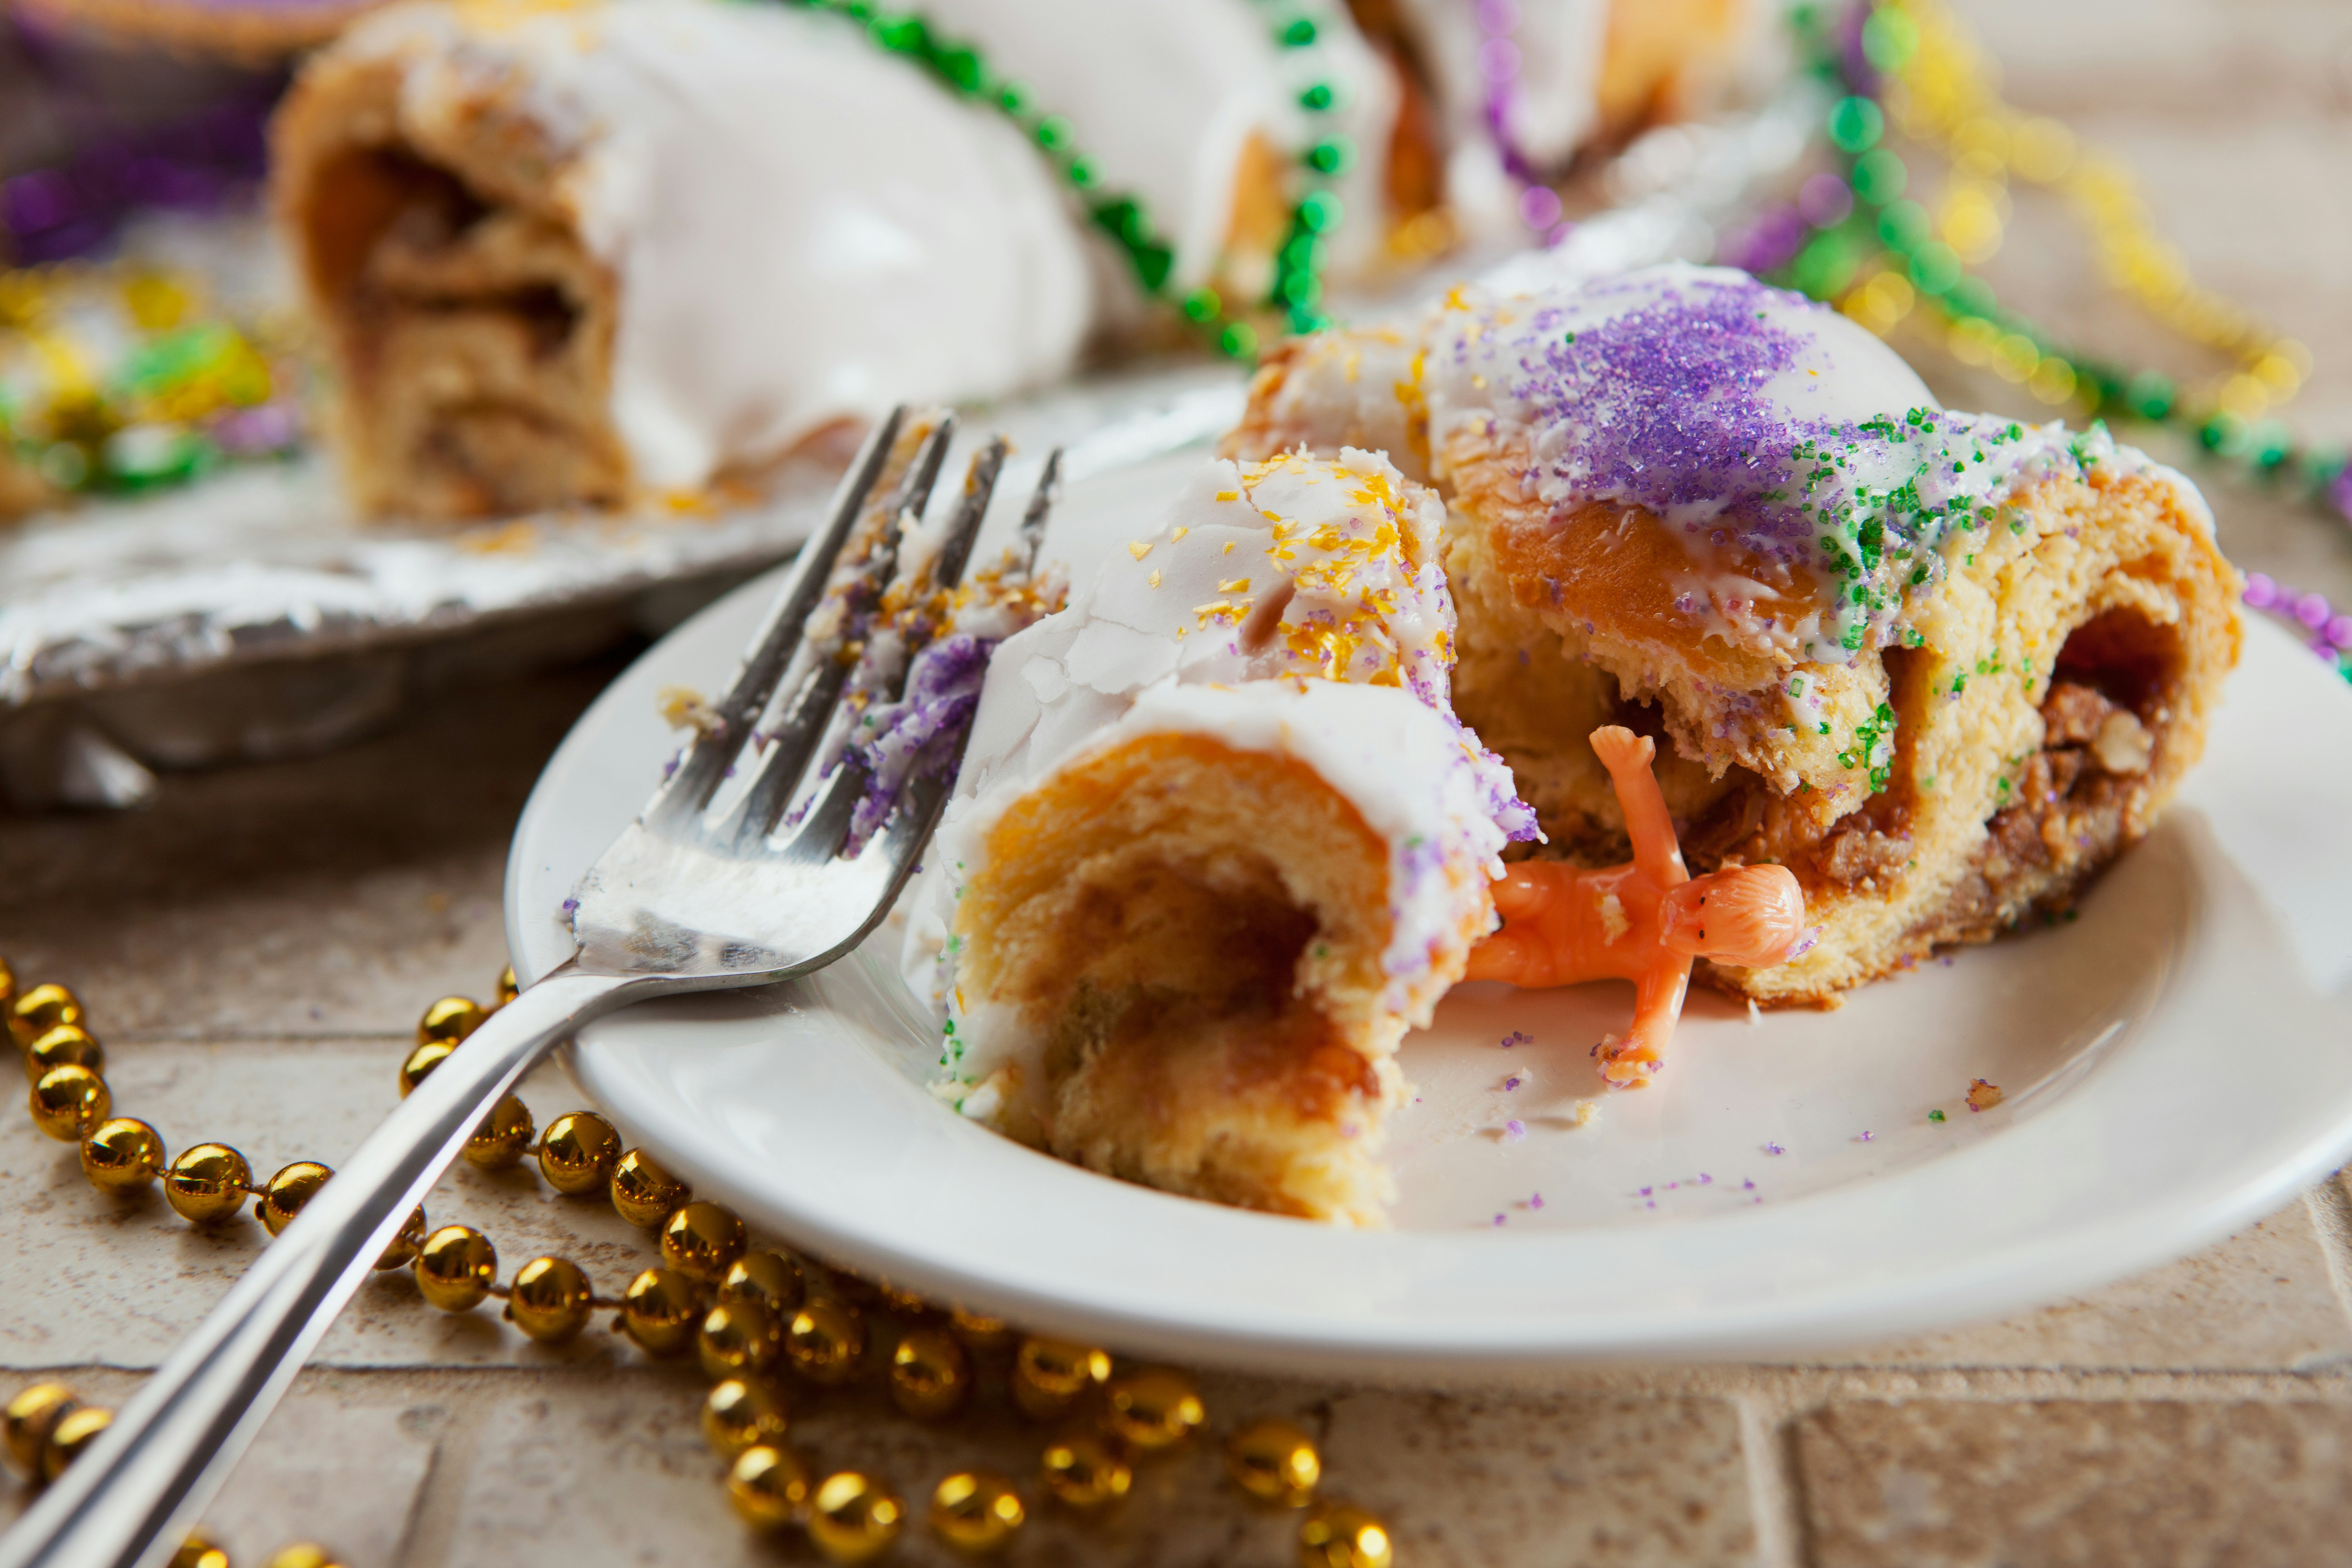 A fork covered in purple frosting rests on the side of a plate that has a slice of cake covered in white frosting and pink, yellow and green sprinkles. There is a plastic baby in between the two pieces of cake.